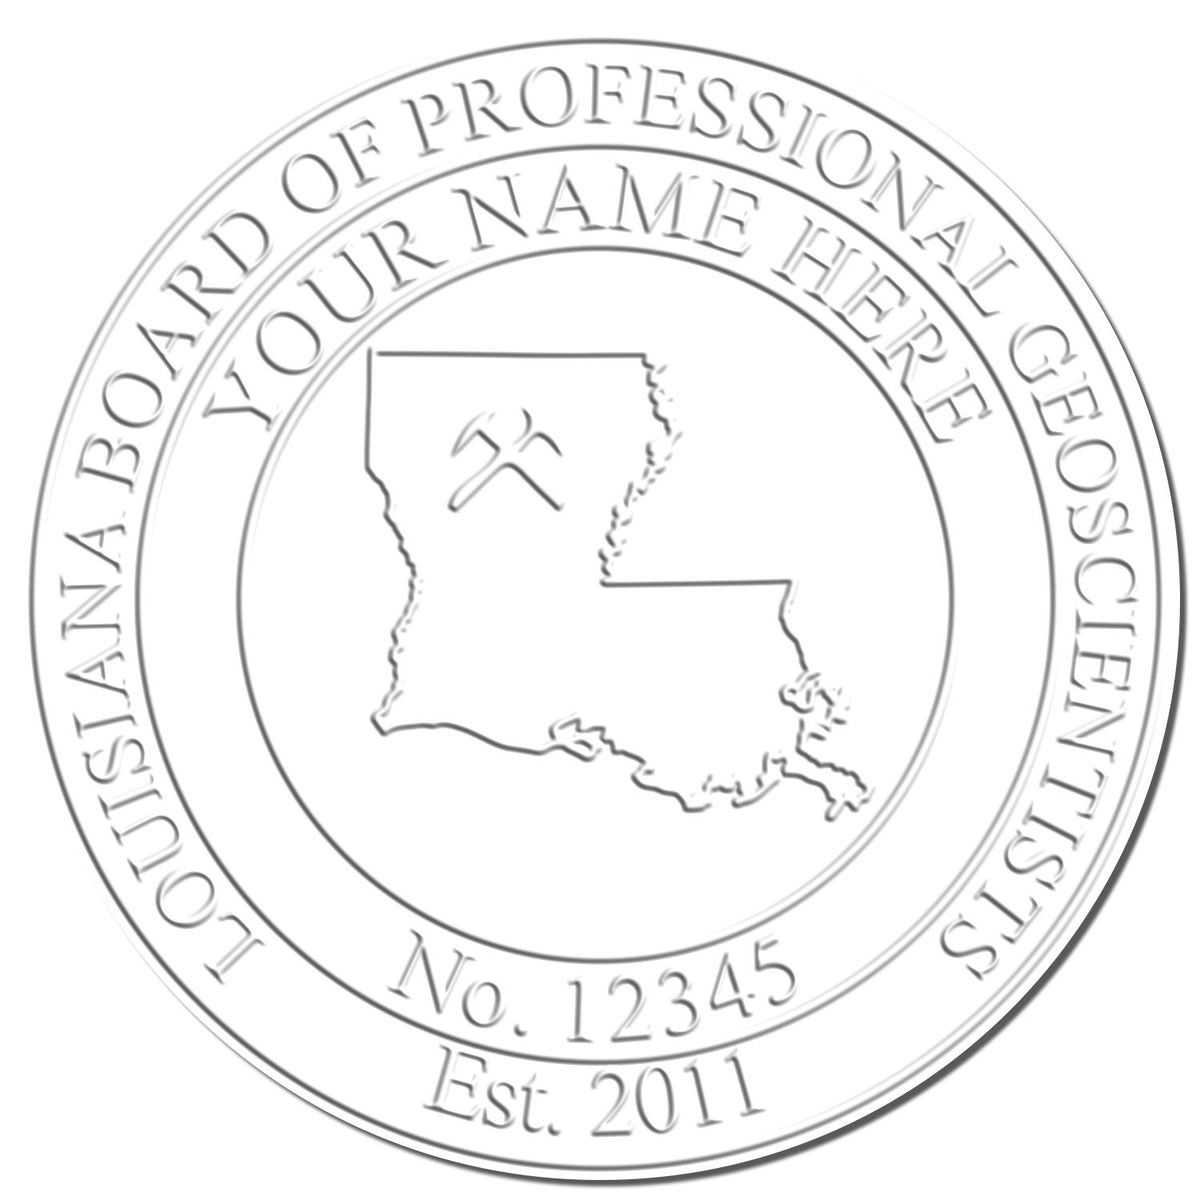 This paper is stamped with a sample imprint of the Handheld Louisiana Professional Geologist Embosser, signifying its quality and reliability.